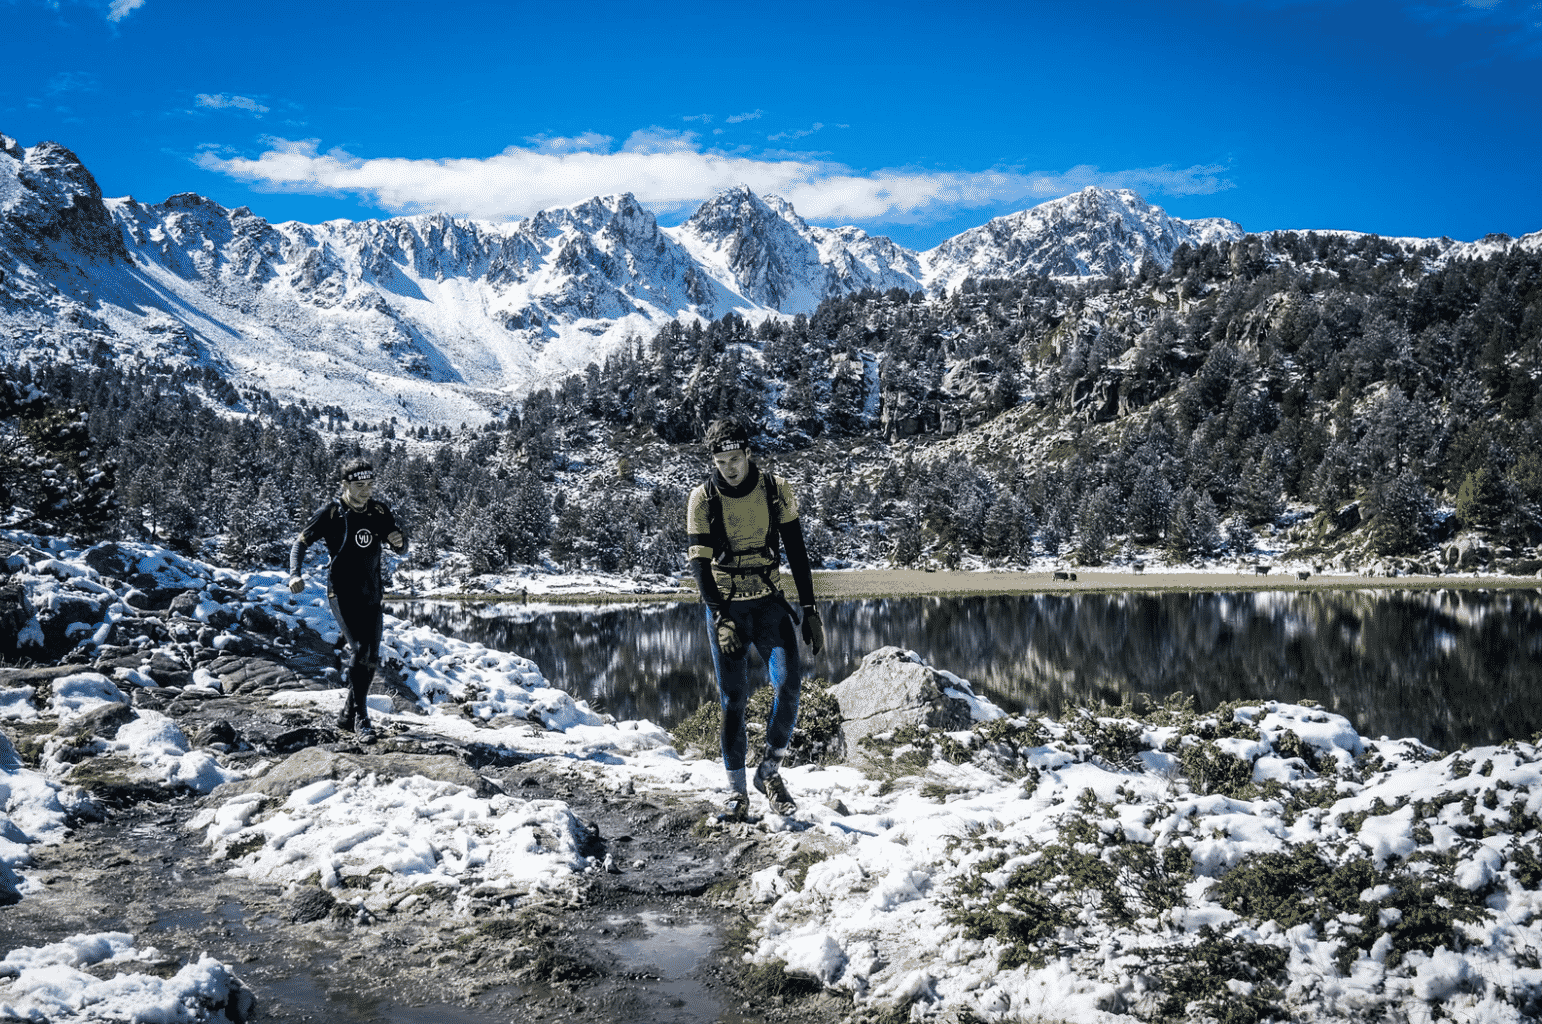 Things to do in Andorra